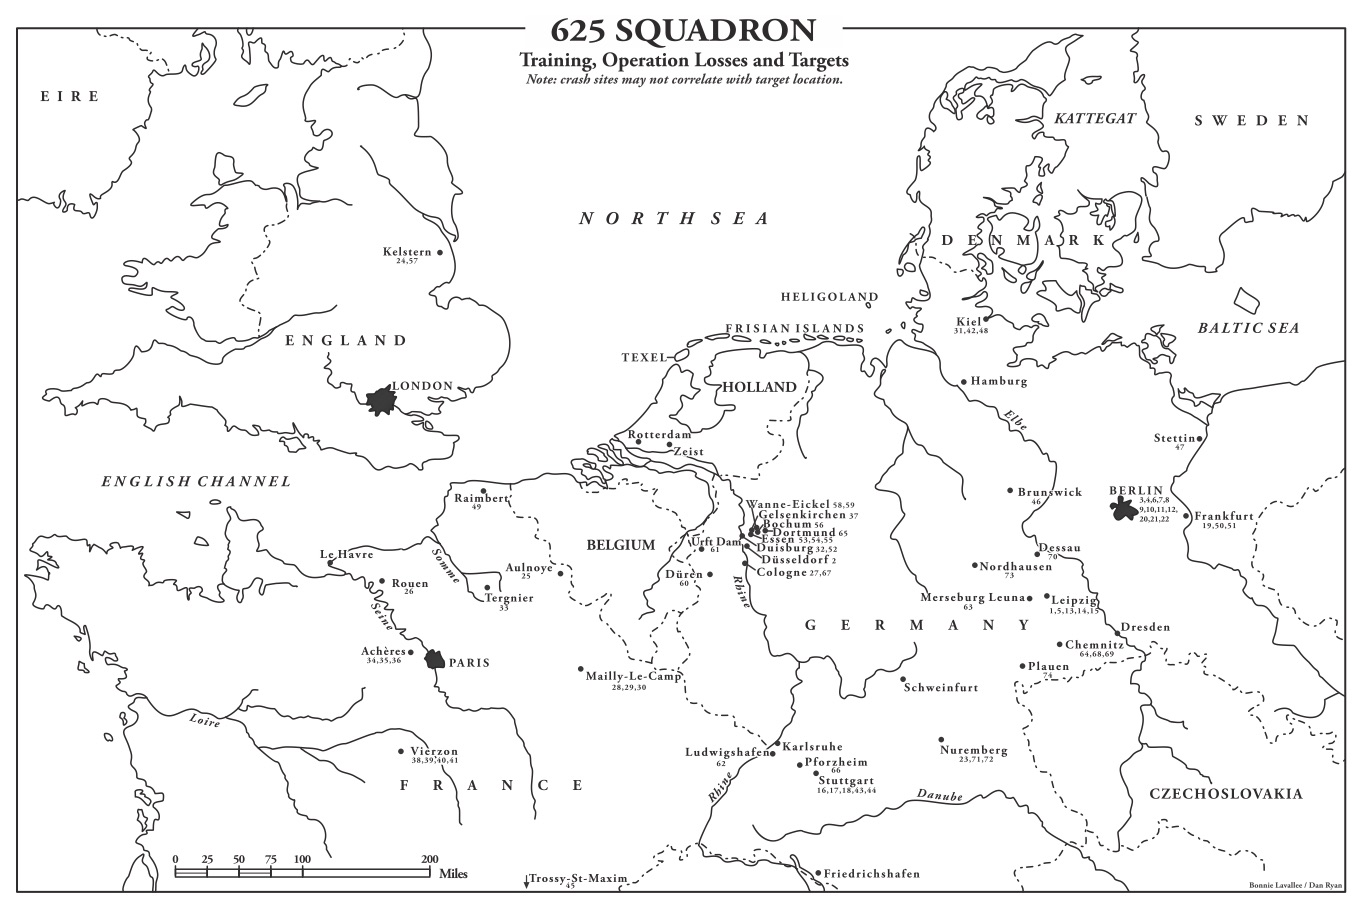 Map of 625 Squadron Training, Operational Losses and Targets